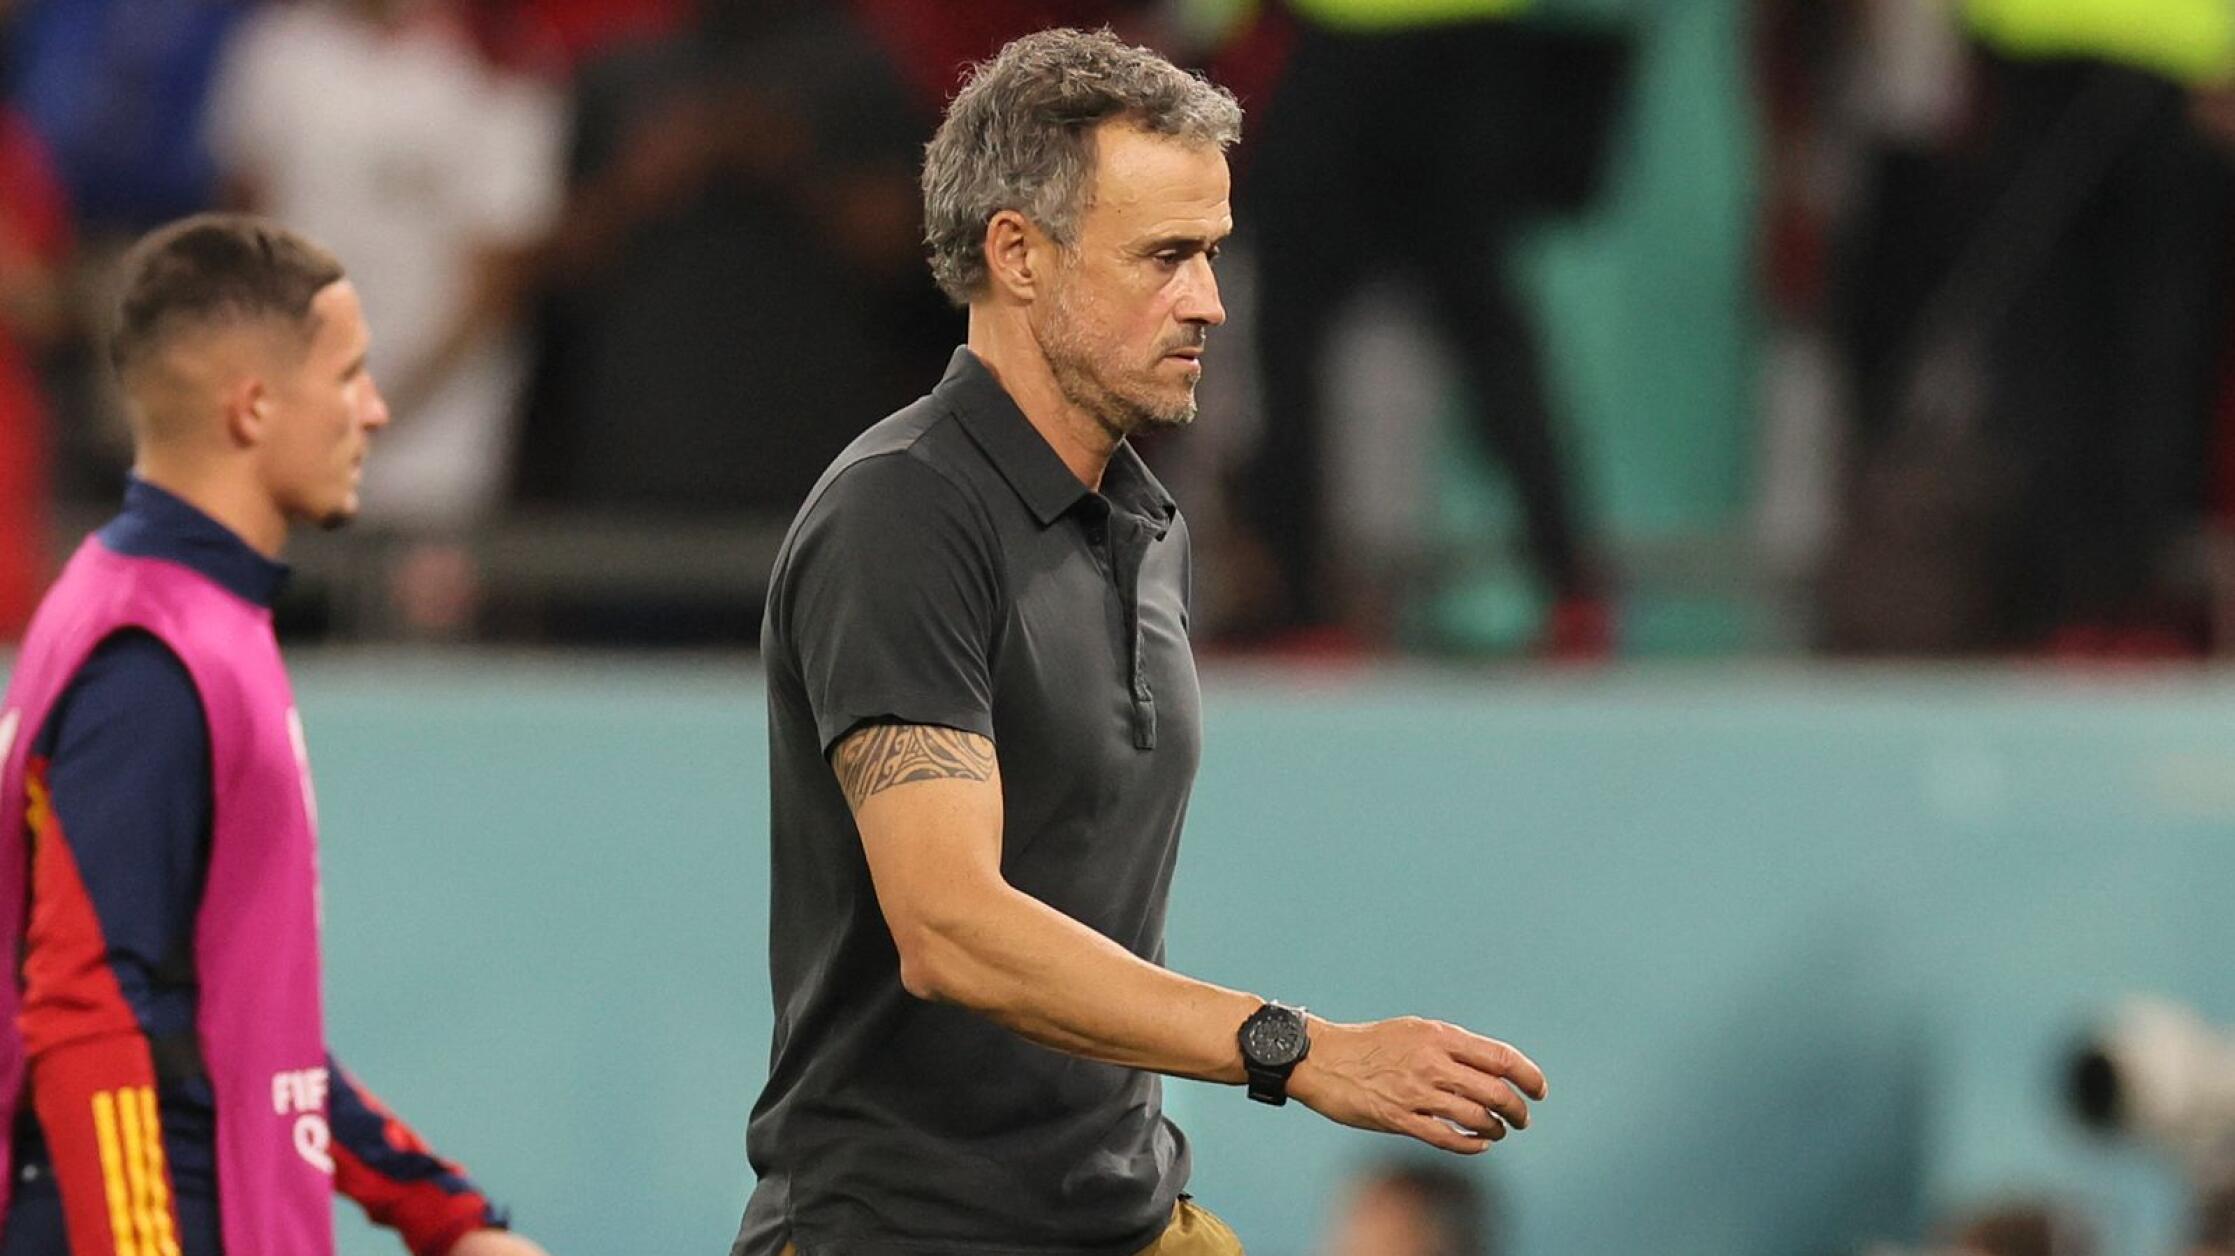 Spain coach Luis Enrique after his side their penalty shoot-out against Morocco during their World Cup Round of 16 match